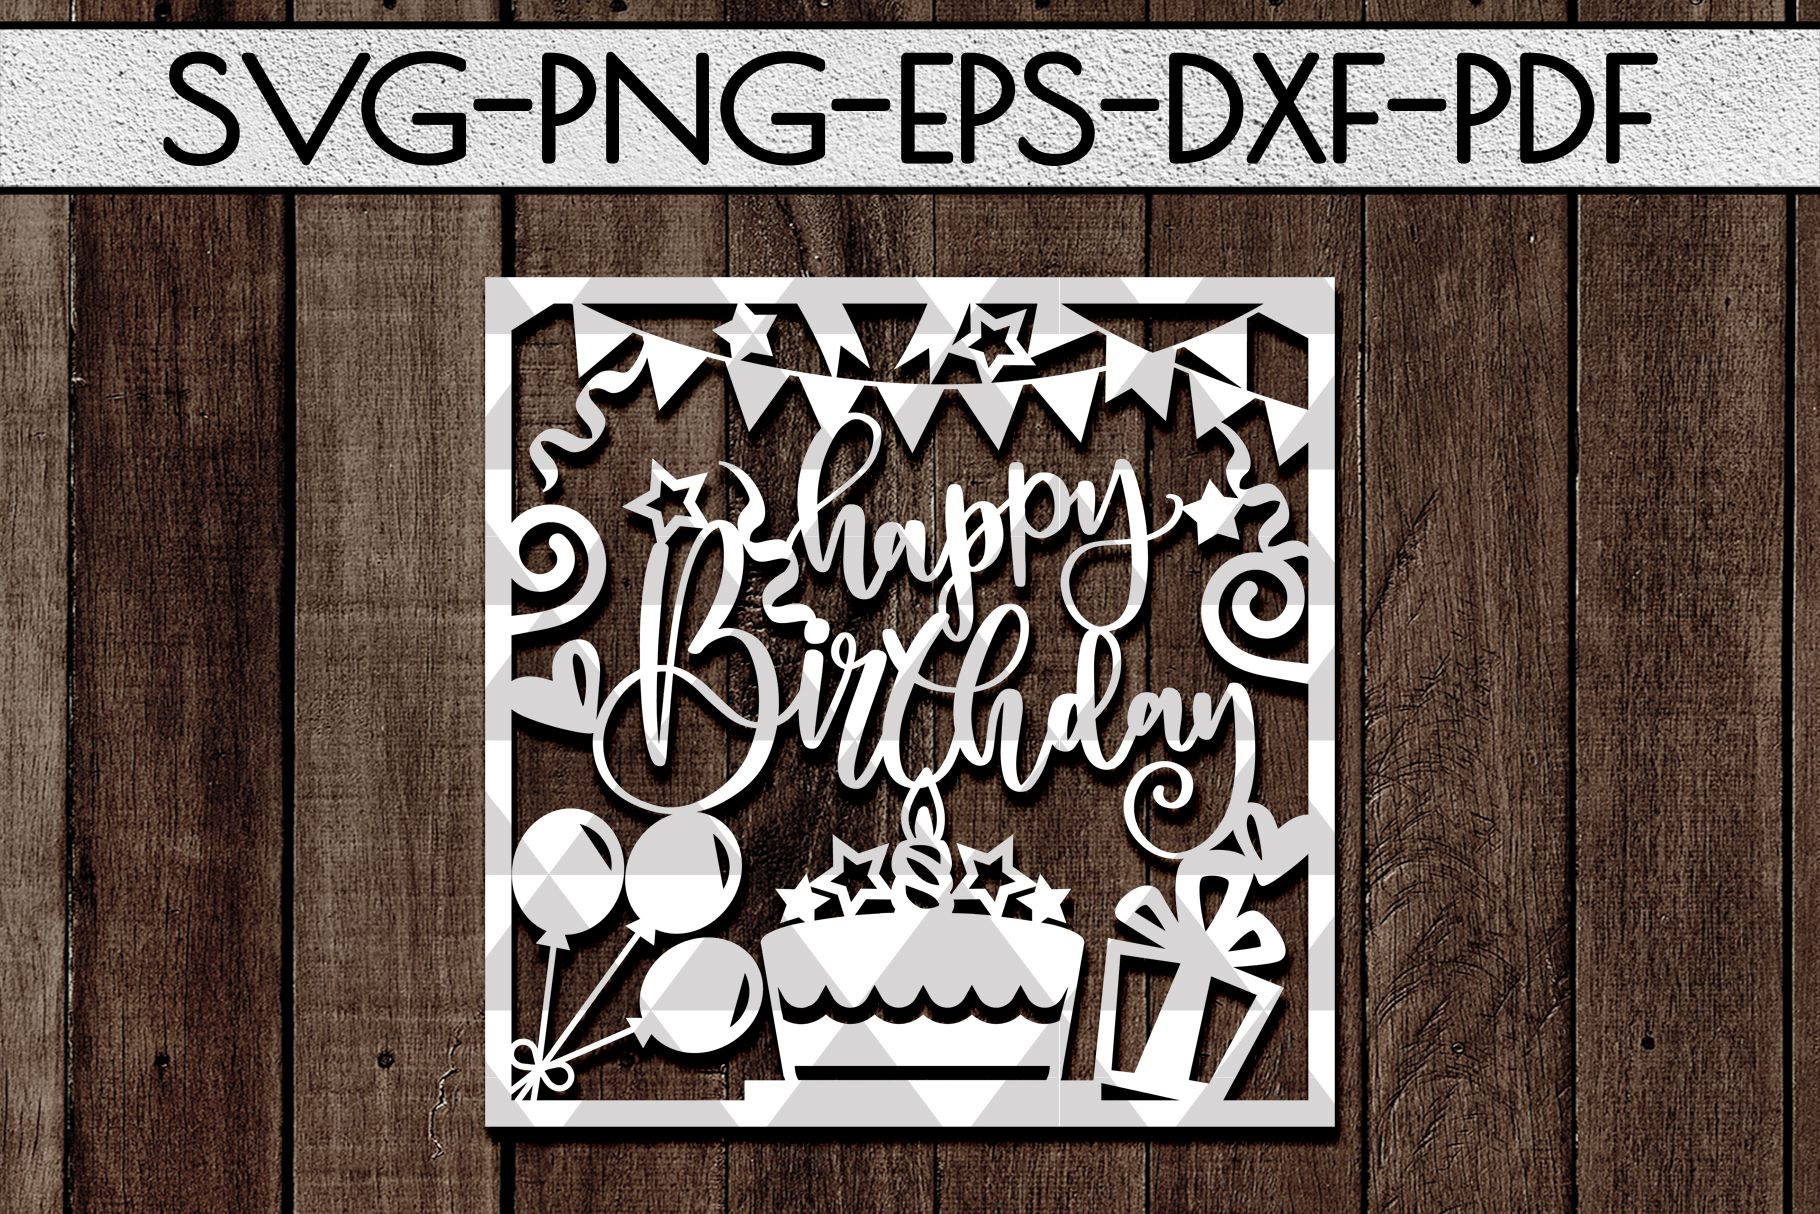 free birthday cards templates downloads